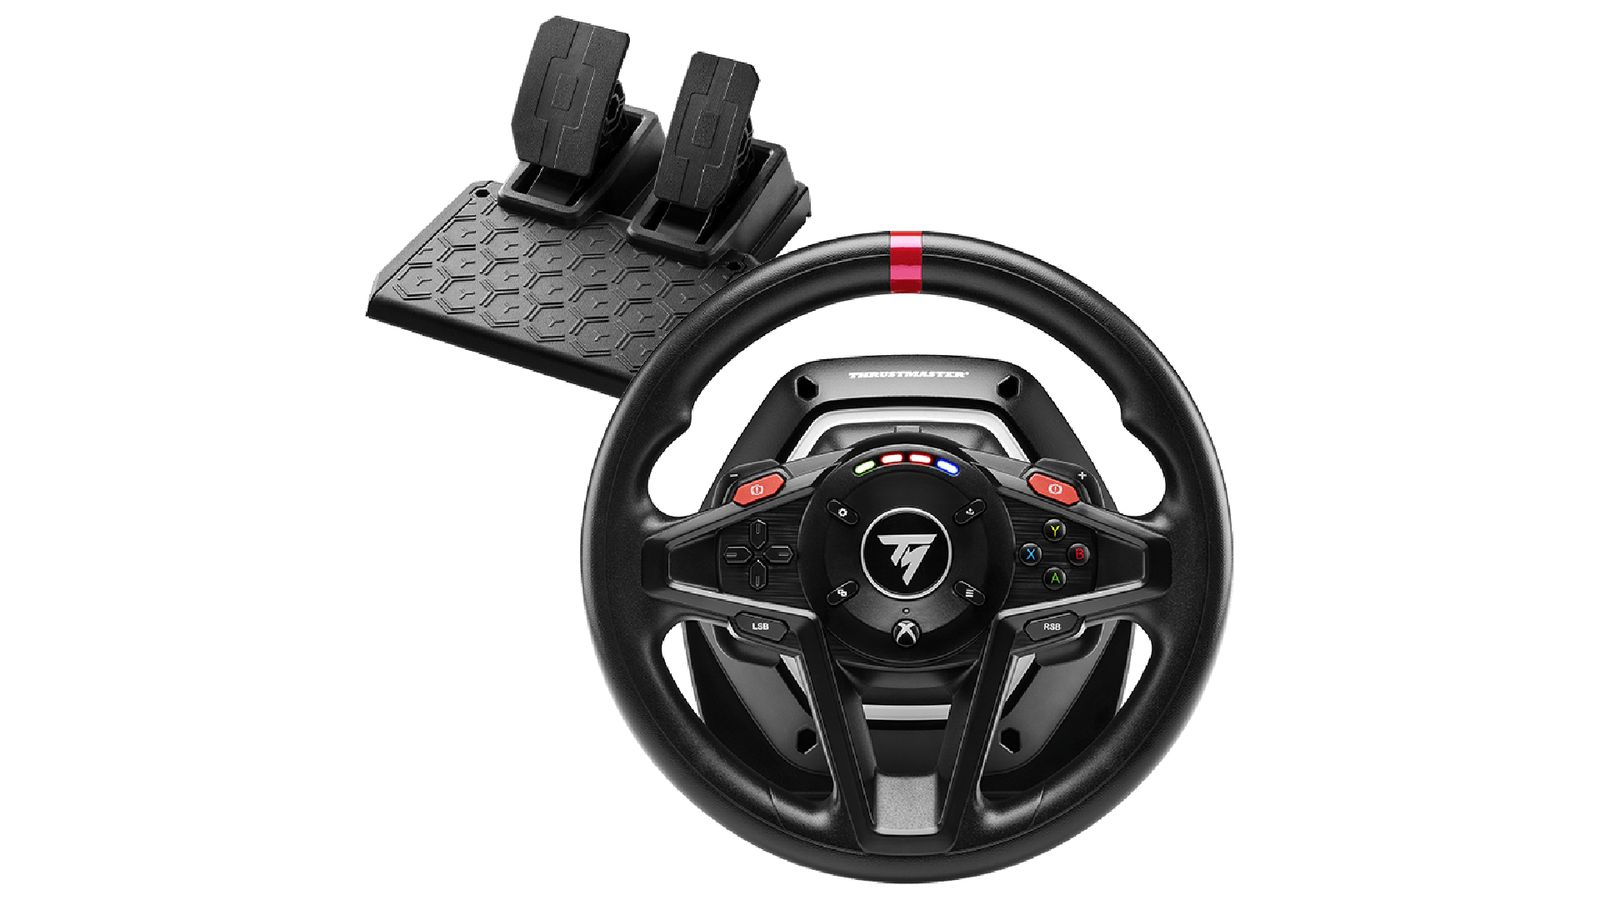 Thrustmaster T128 X product image of a black wheel and pedals with a red centre mark.